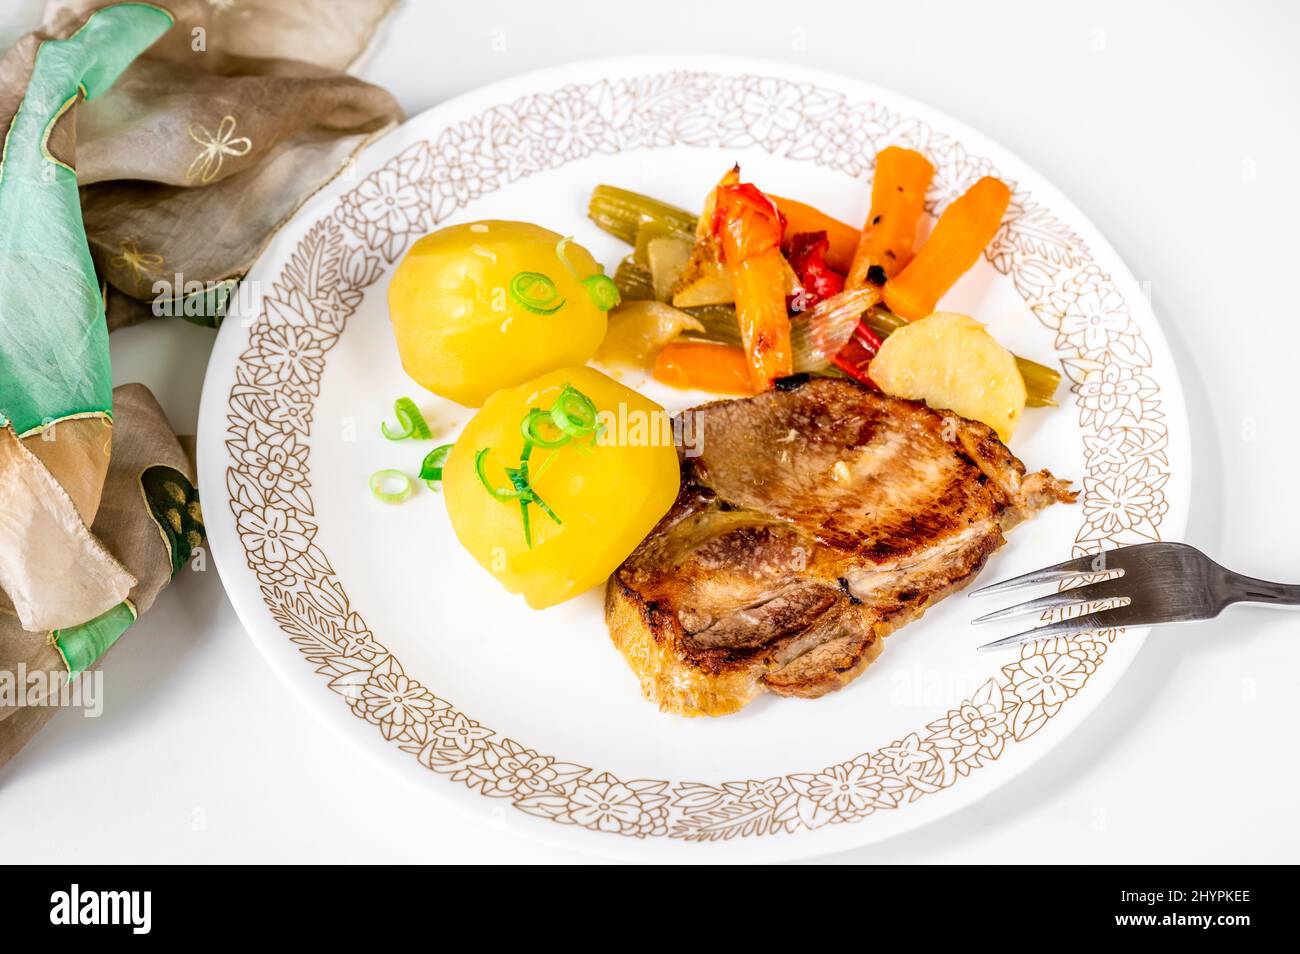 Roasted pork steak, boiled potato and baked vegetable on white plate with fork, on white background with towel, closeup. Stock Photo